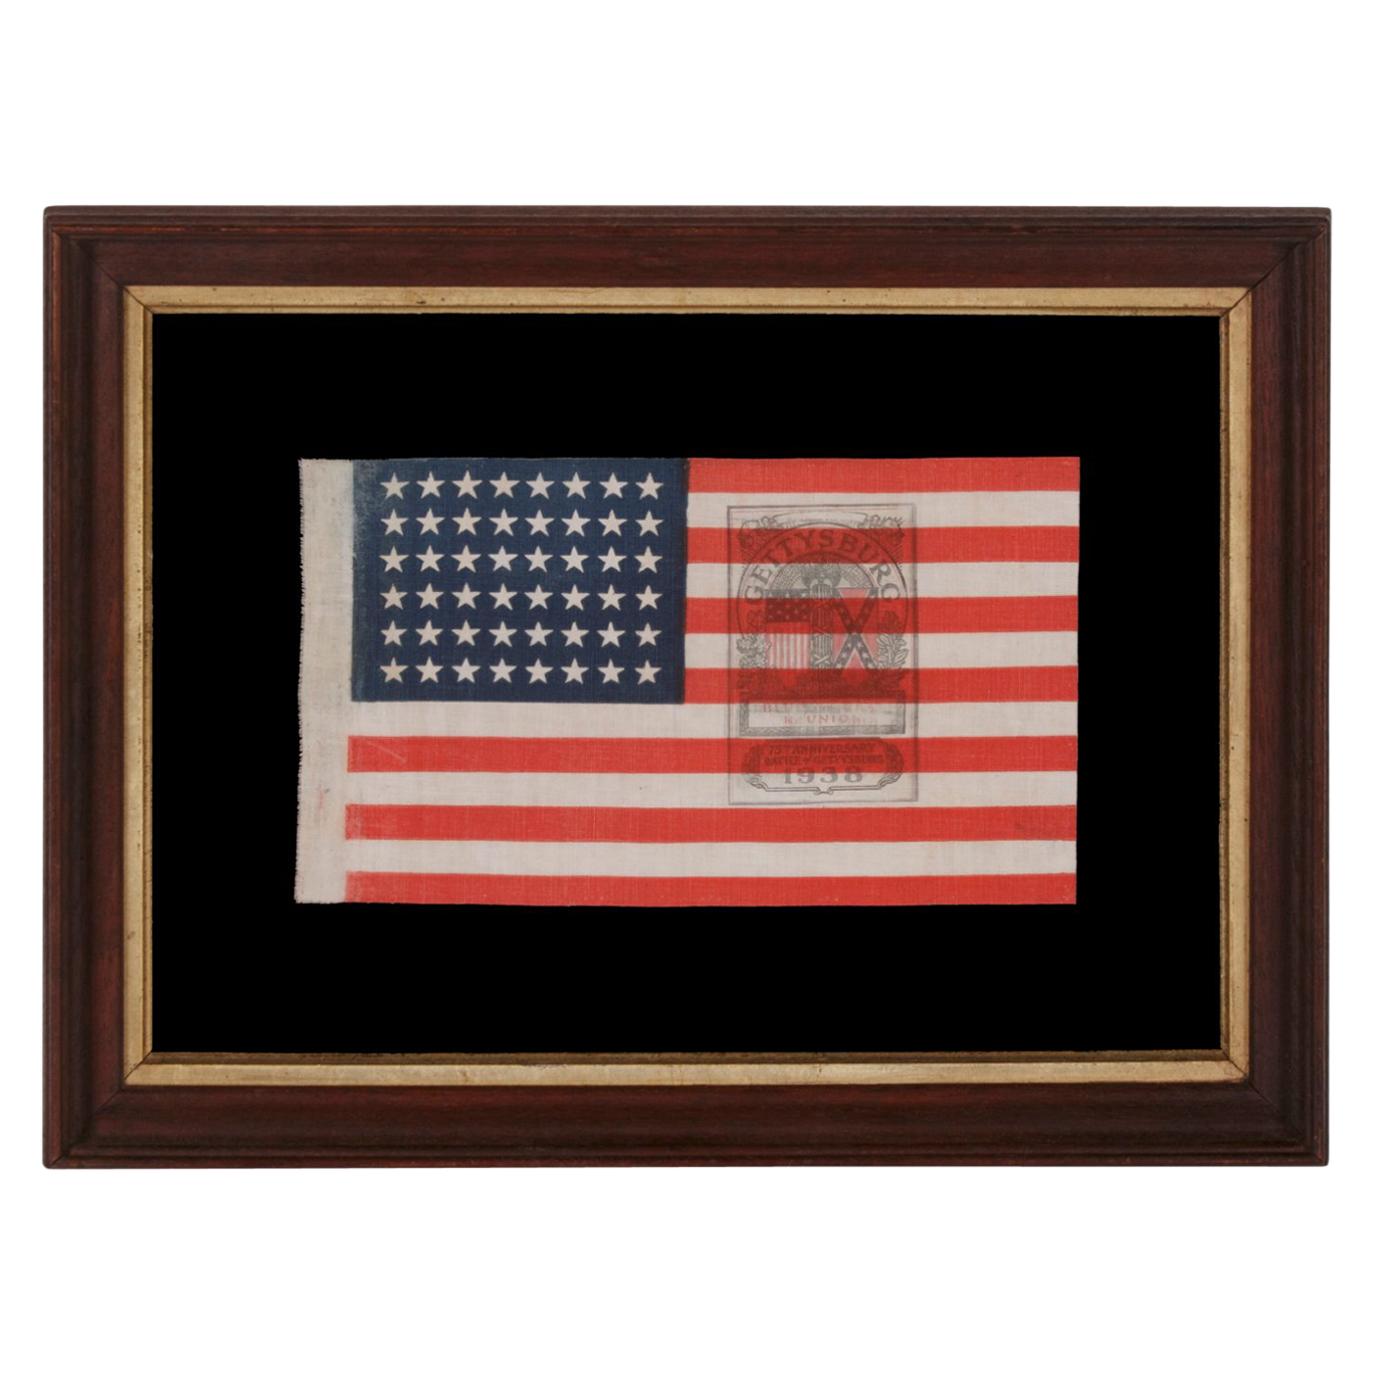 48 Star American Parade Flag with a Rare Gettysburg Two Color Overprint